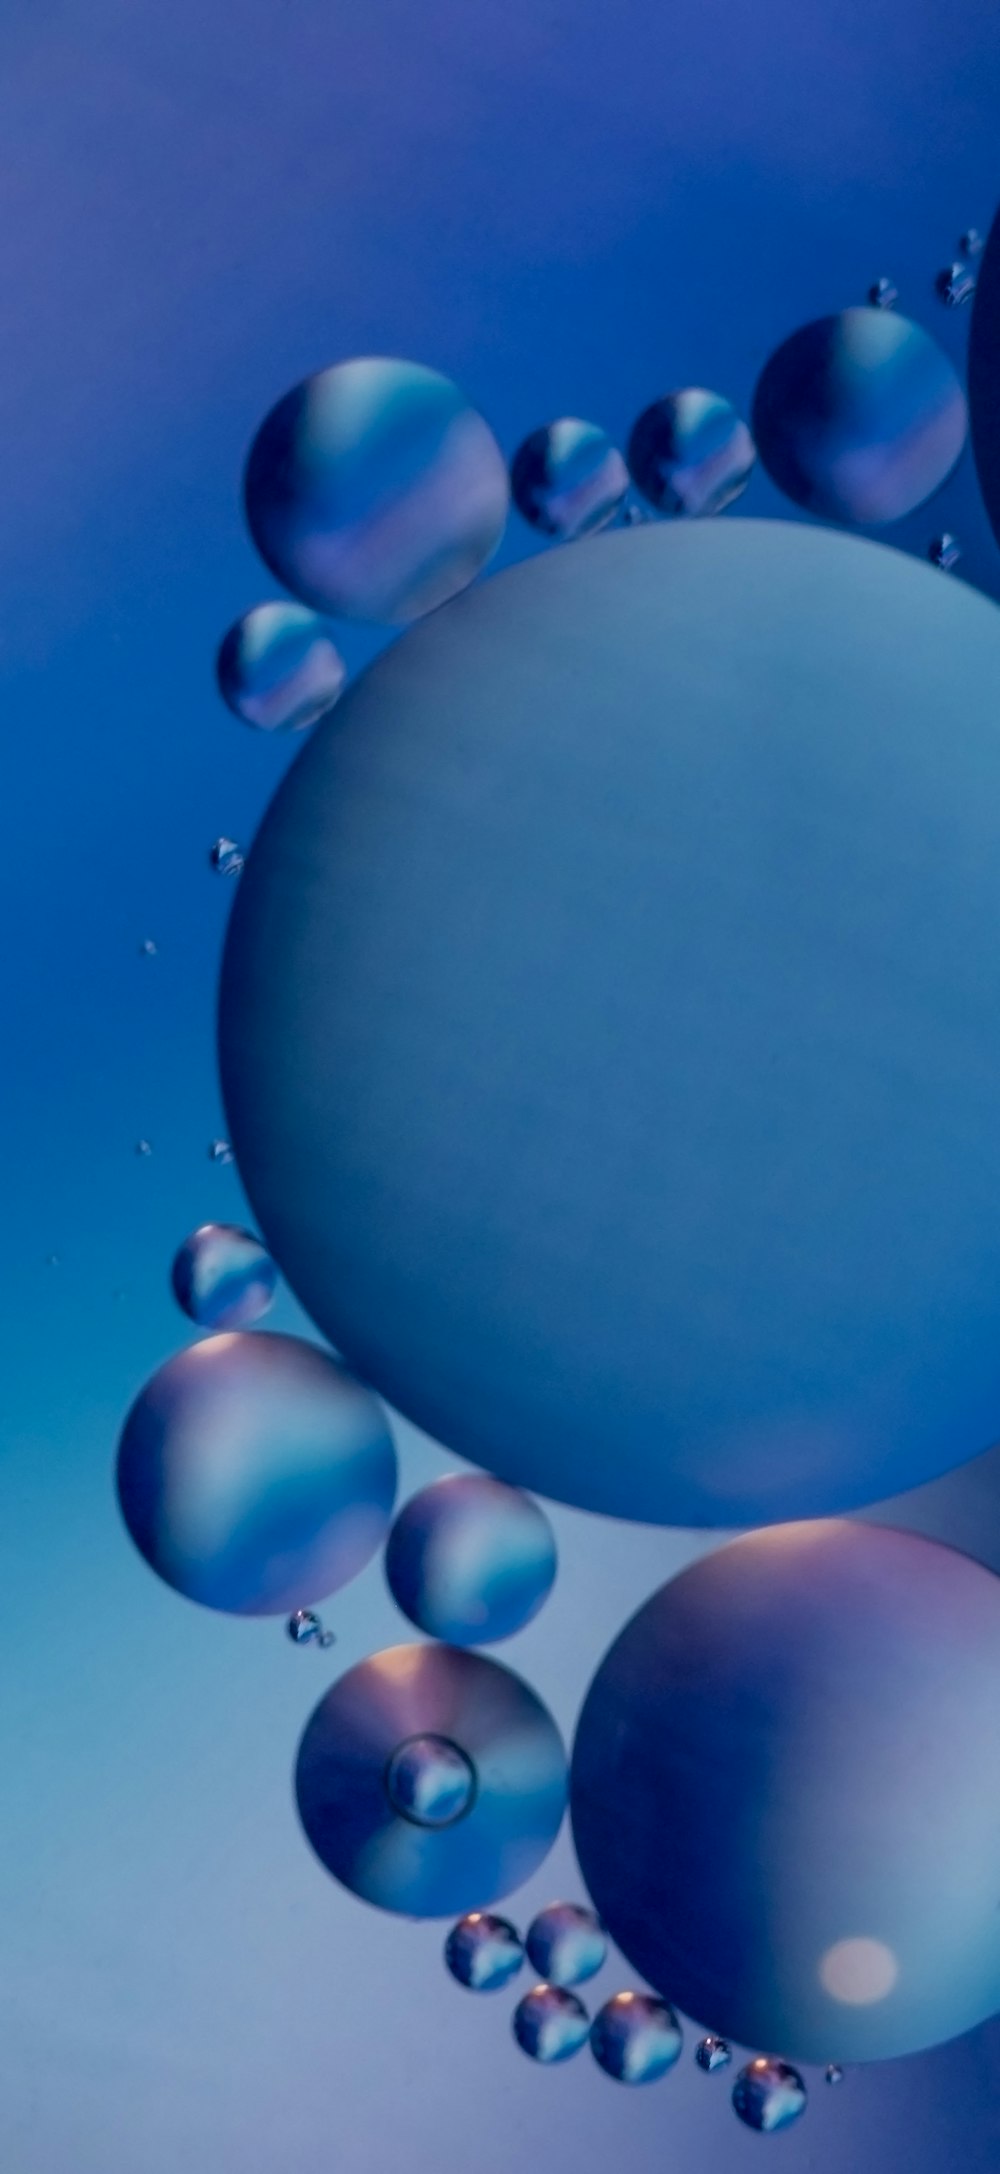 blue and white balloons with blue background